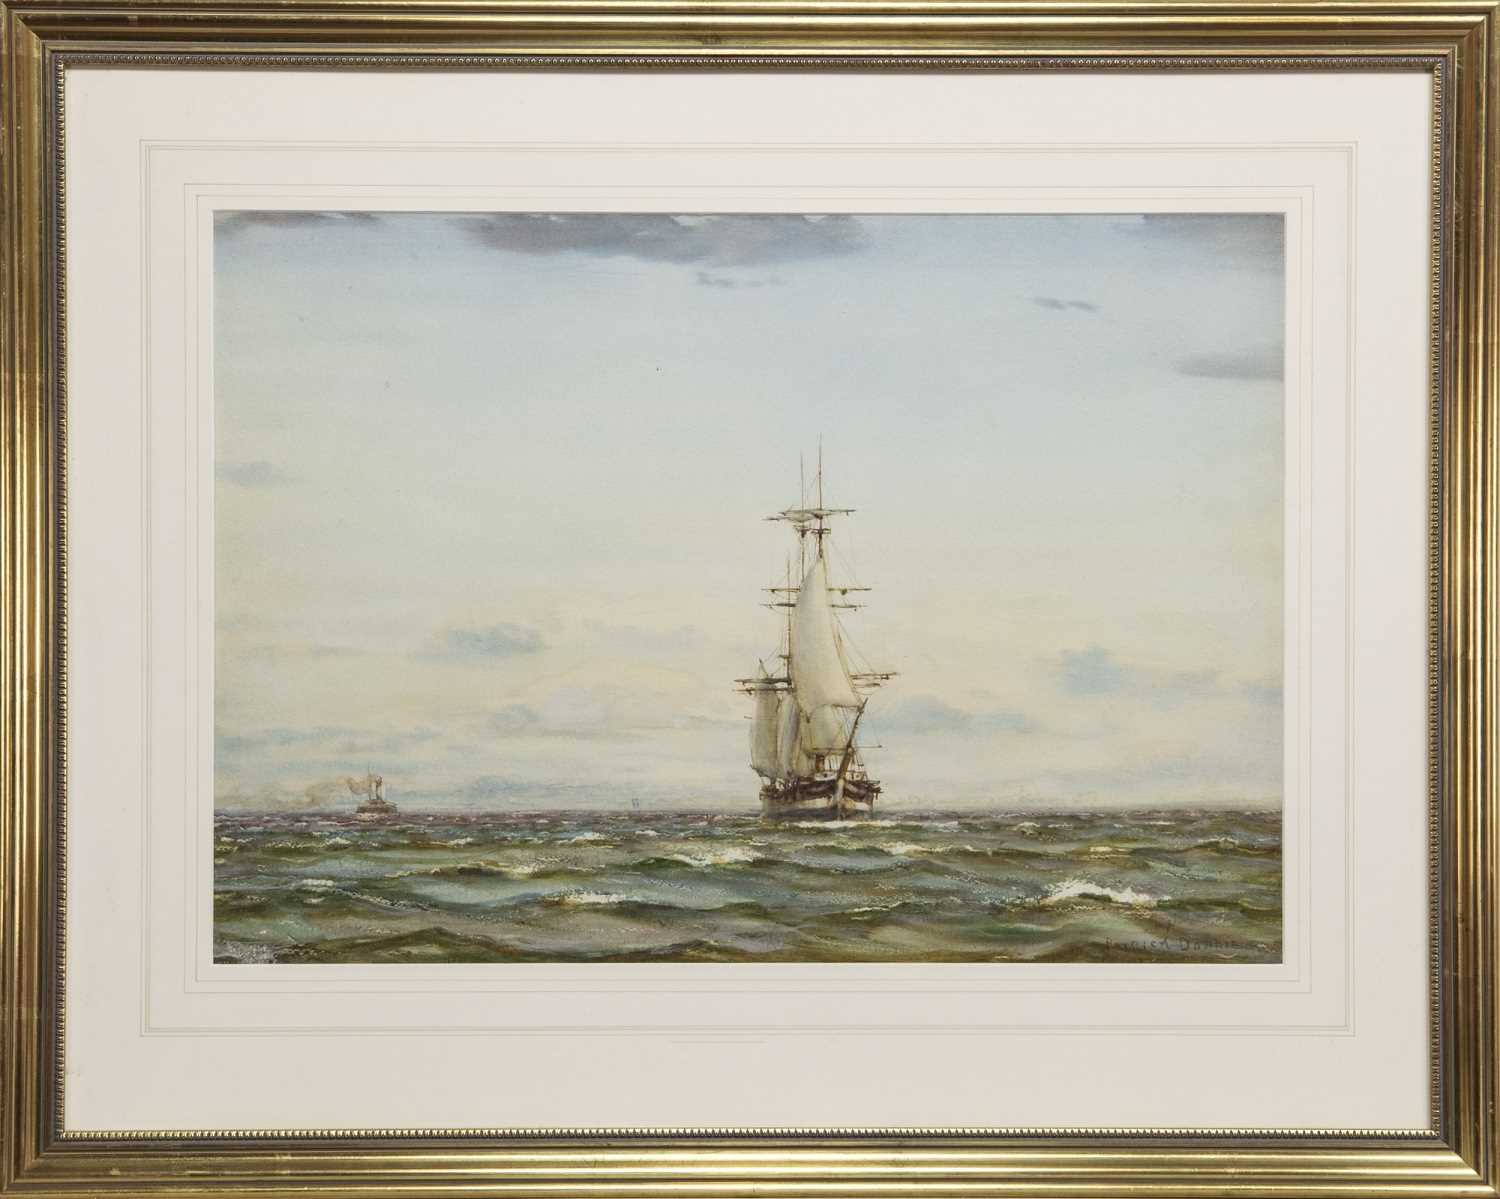 Lot 276 - A BREEZY DAY ON THE FIRTH OF CLYDE, A WATERCOLOUR BY PATRICK DOWNIE